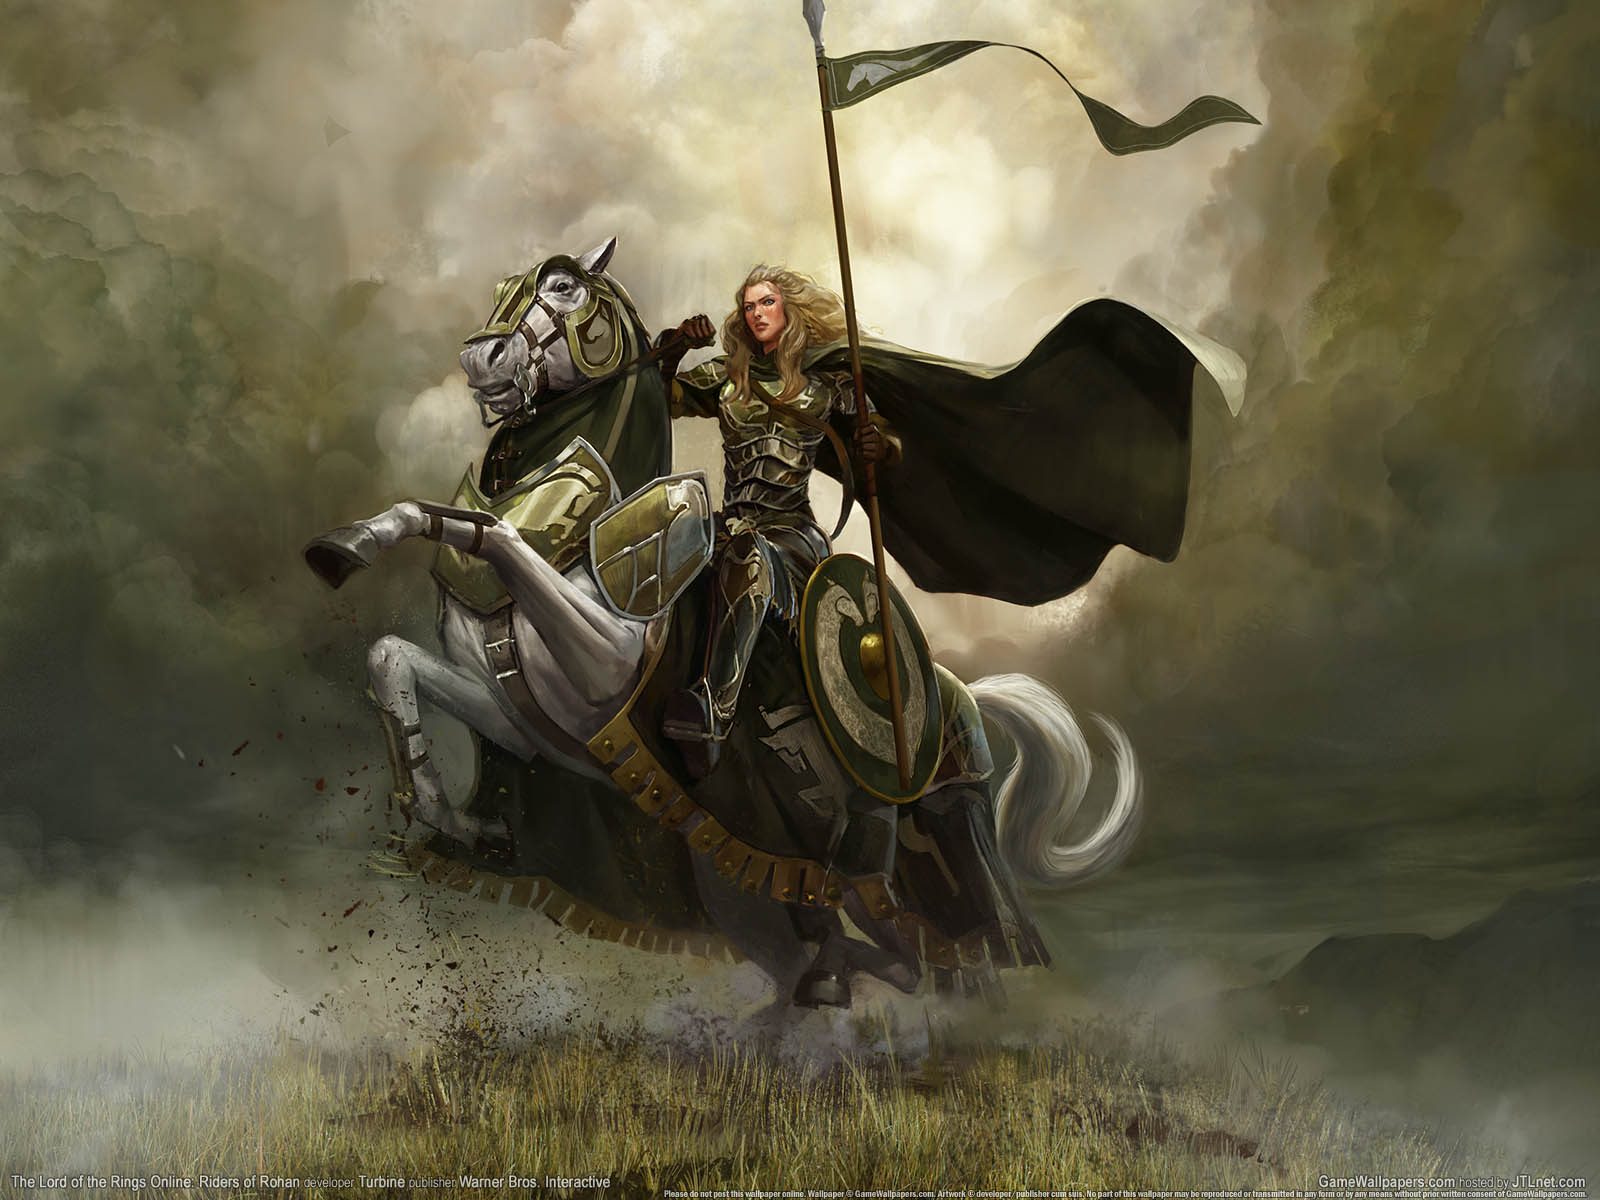 The Lord of the Rings Online%253A Riders of Rohan achtergrond 02 1600x1200